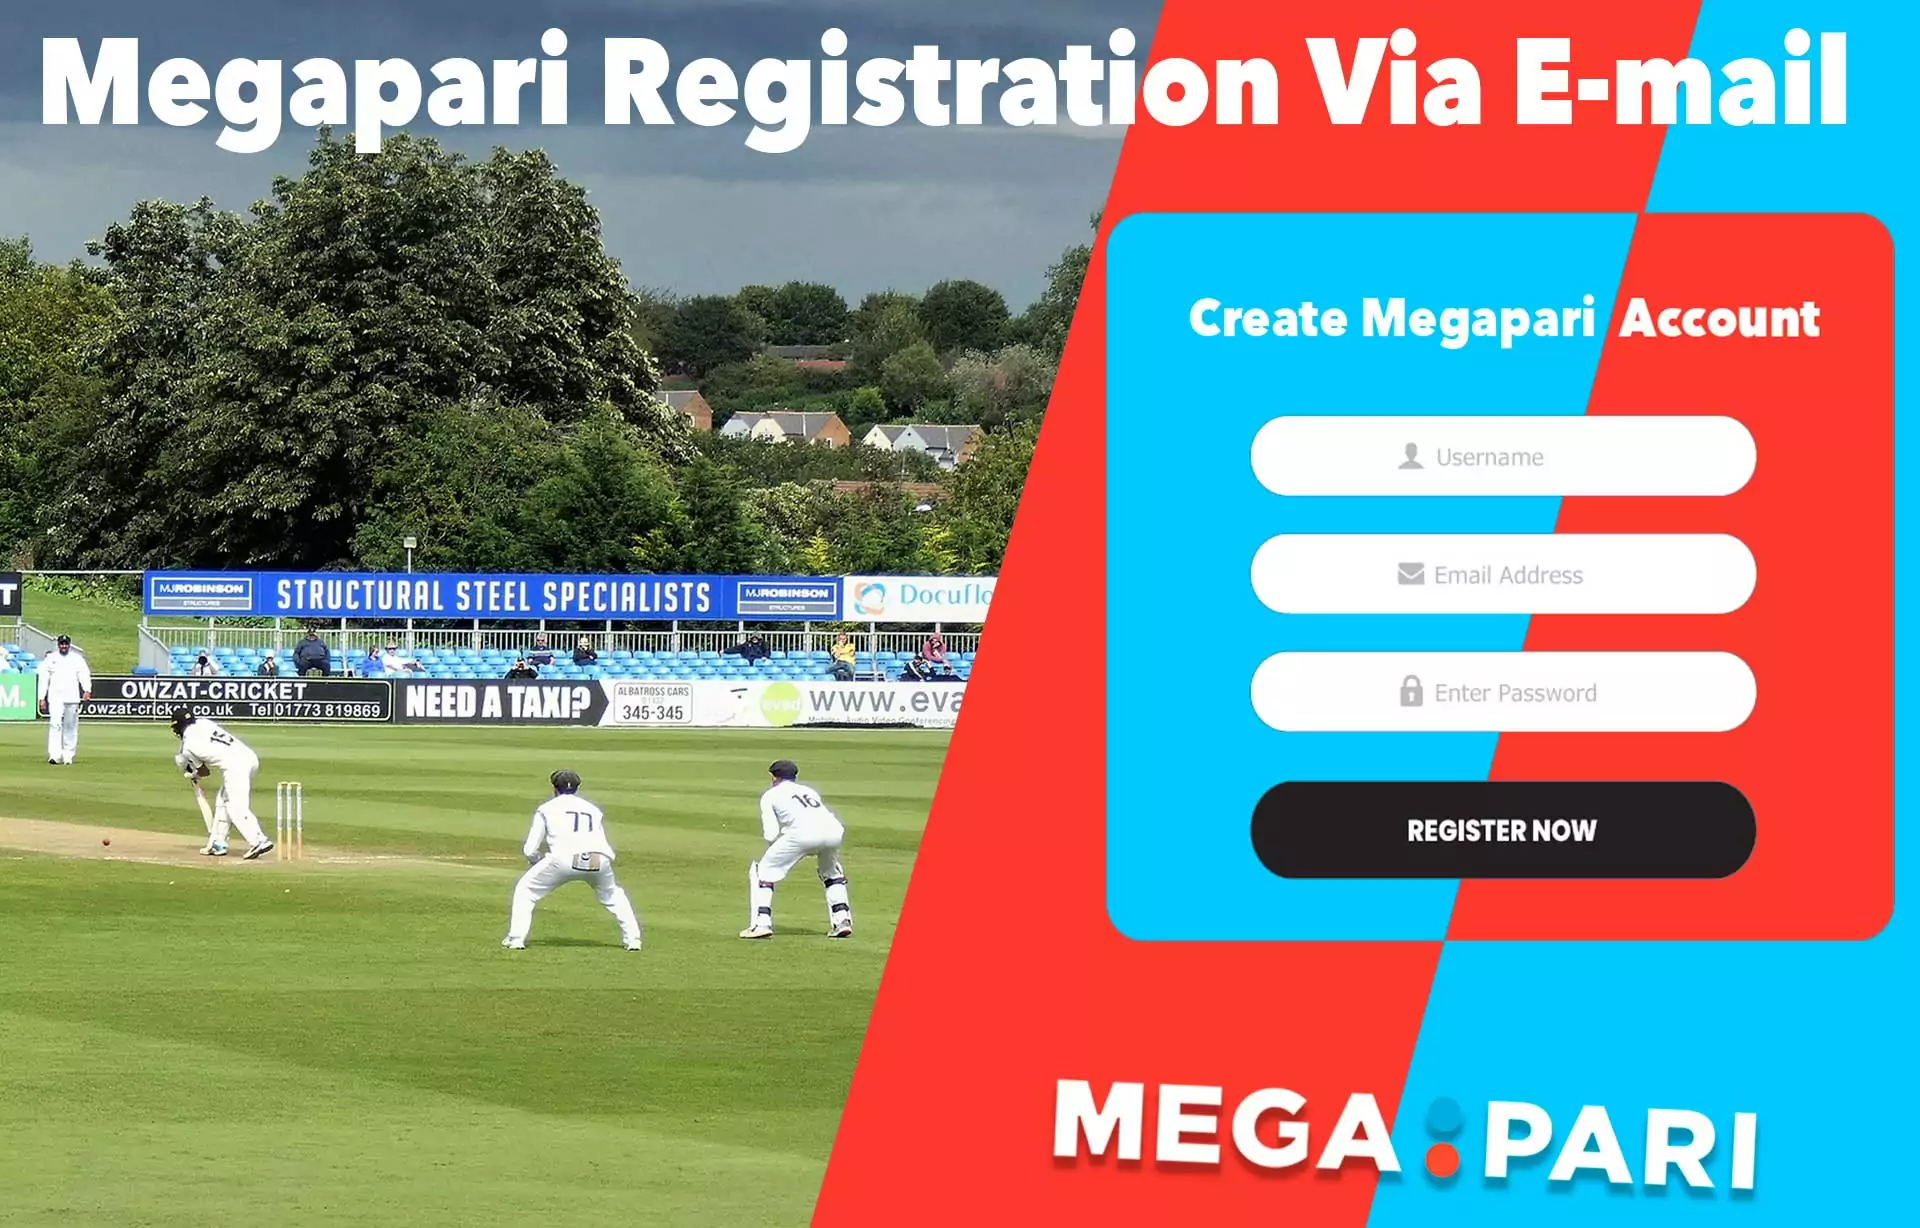 Use your email for joining to Megapari.